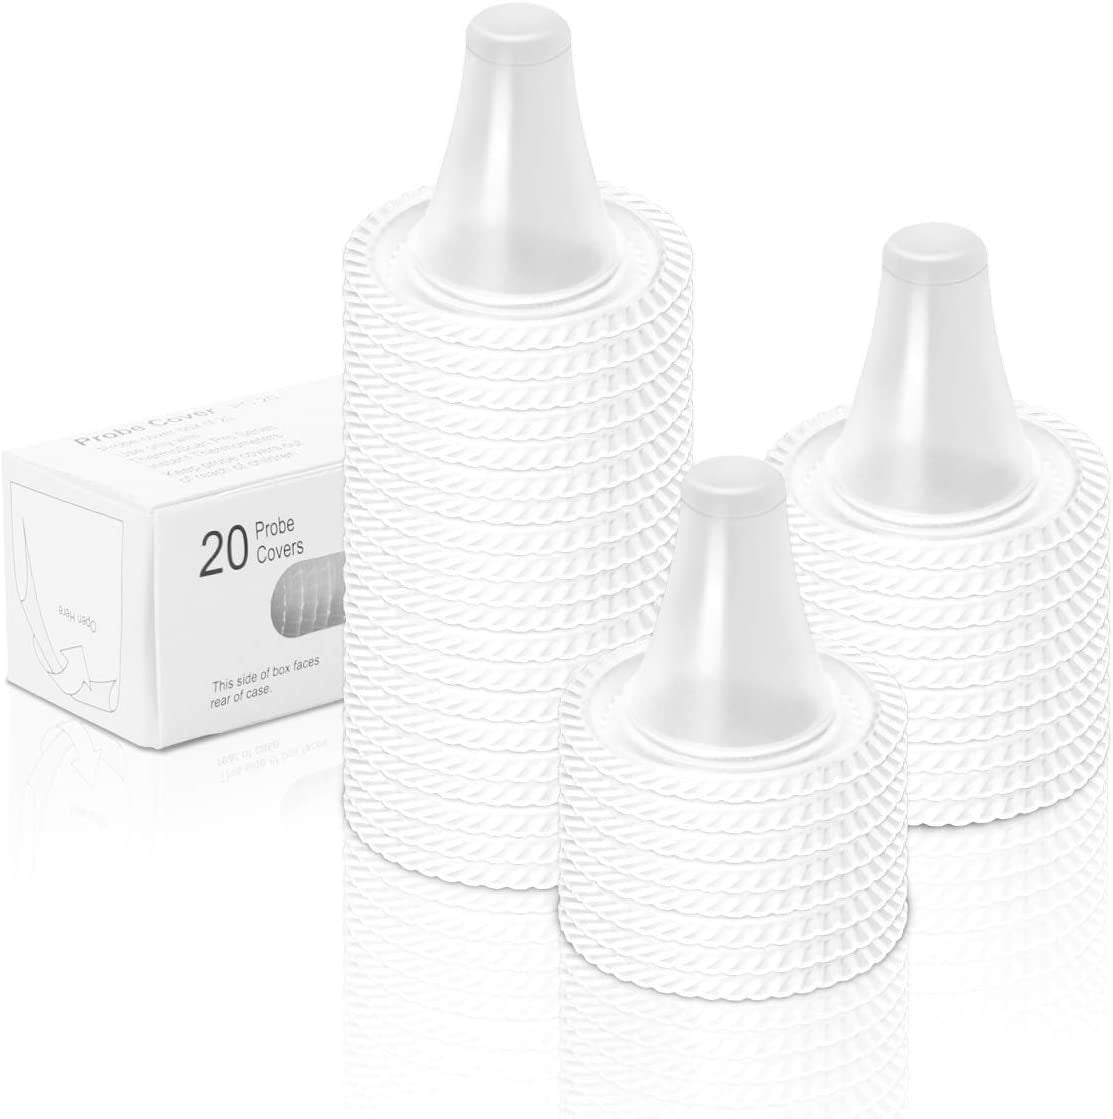 100X Ear Thermometer Probe Covers, Lens Filters, Refill Covers for All  Braun themometer Models BPA Free Digital Disposable Covers